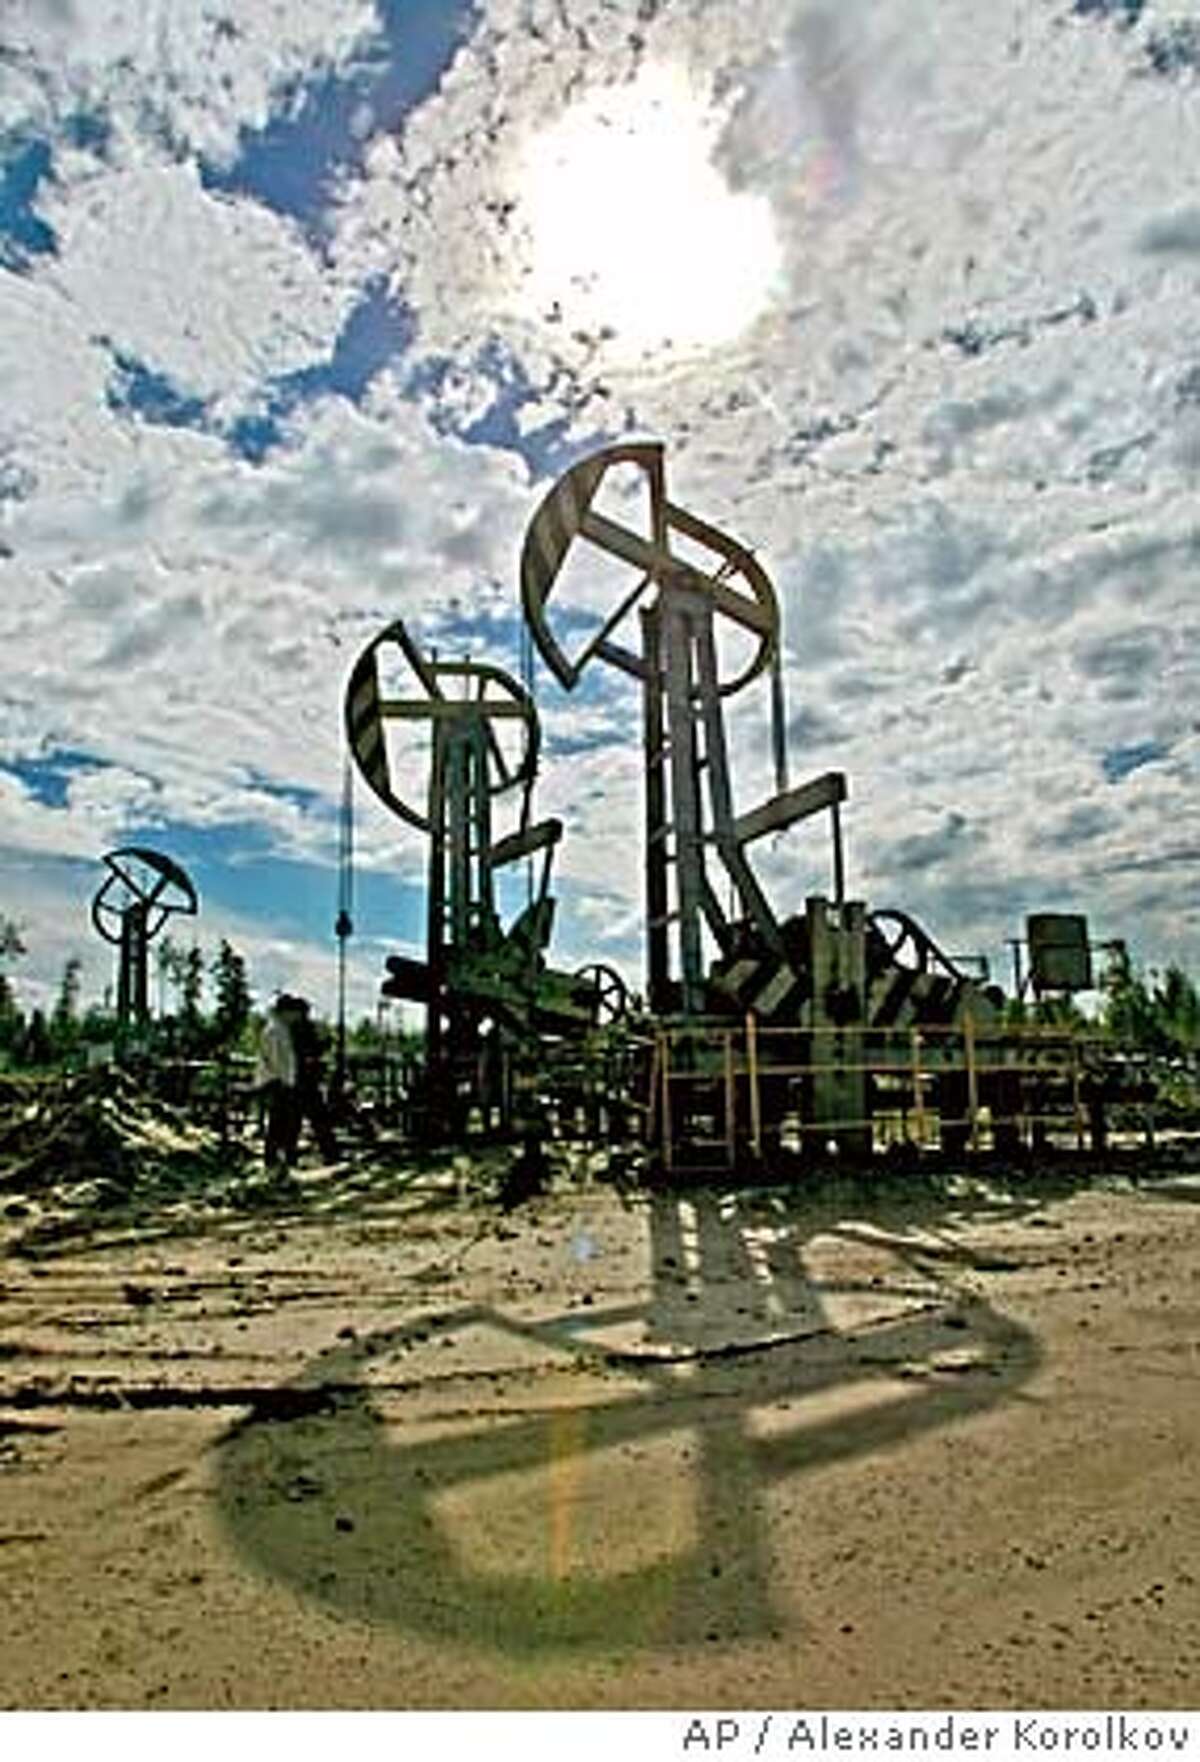 **FILE** Russian oil gaint Yukos oil rig is seen near Tyumen, Western Siberia, about 1675 kilometers (1,000 miles) east of Moscow, in this June 2003 file picture. The oil wing of Russia's state-controlled natural gas giant Gazprom does not intend to pull out of this weekend's auction of the main production unit of the embattled Yukos oil company. An official at the Russian Federal Property Fund, the agency conducting the auction, said Friday, Dec. 17, 2004, that the sale would proceed as planned. (AP Photo/Alexander Korolkov, Izvestia) ** MAGAZINES OUT ** MAGAZINES OUT Business#Business#Chronicle#12/29/2004#ALL#5star##0422521793